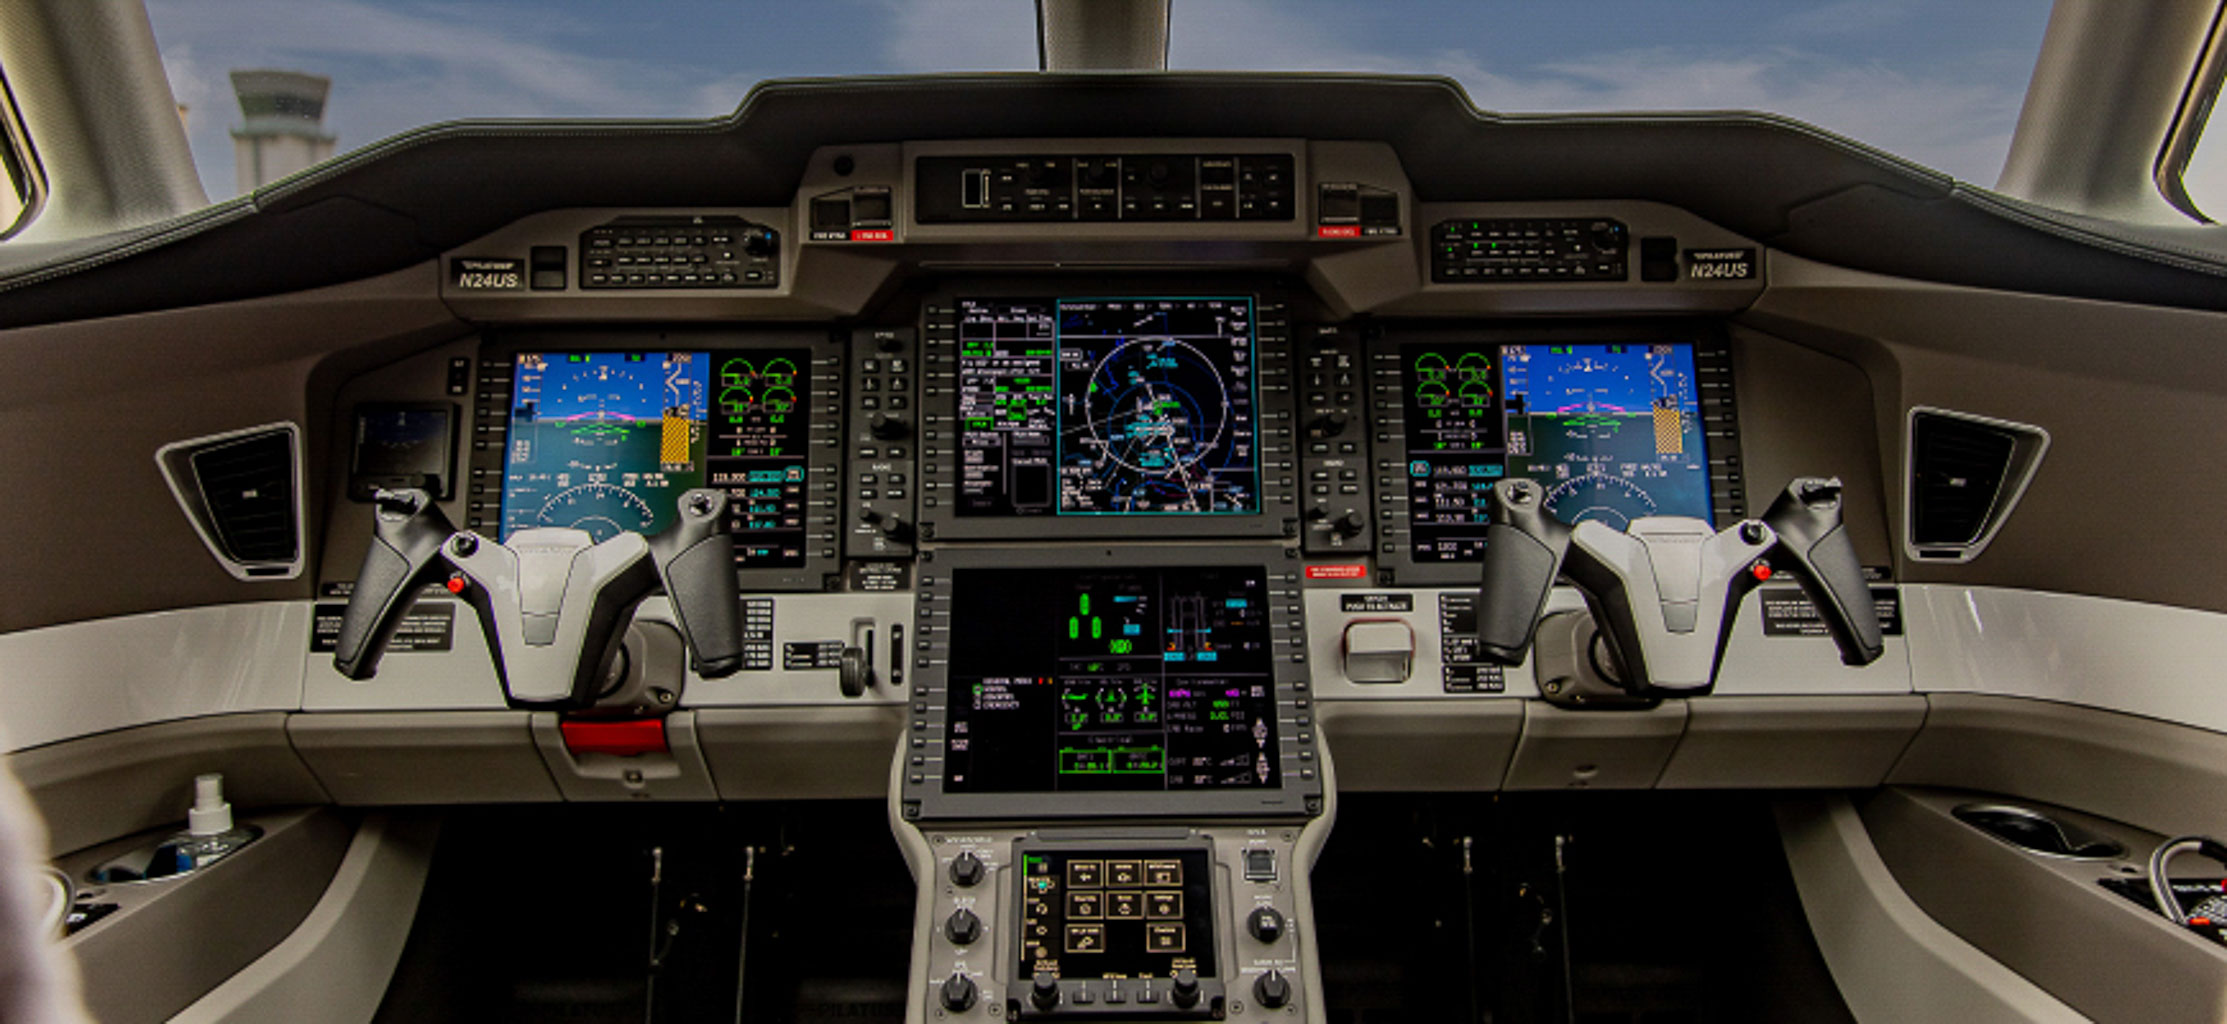 An interior view of a jet cockpit and instrument panel